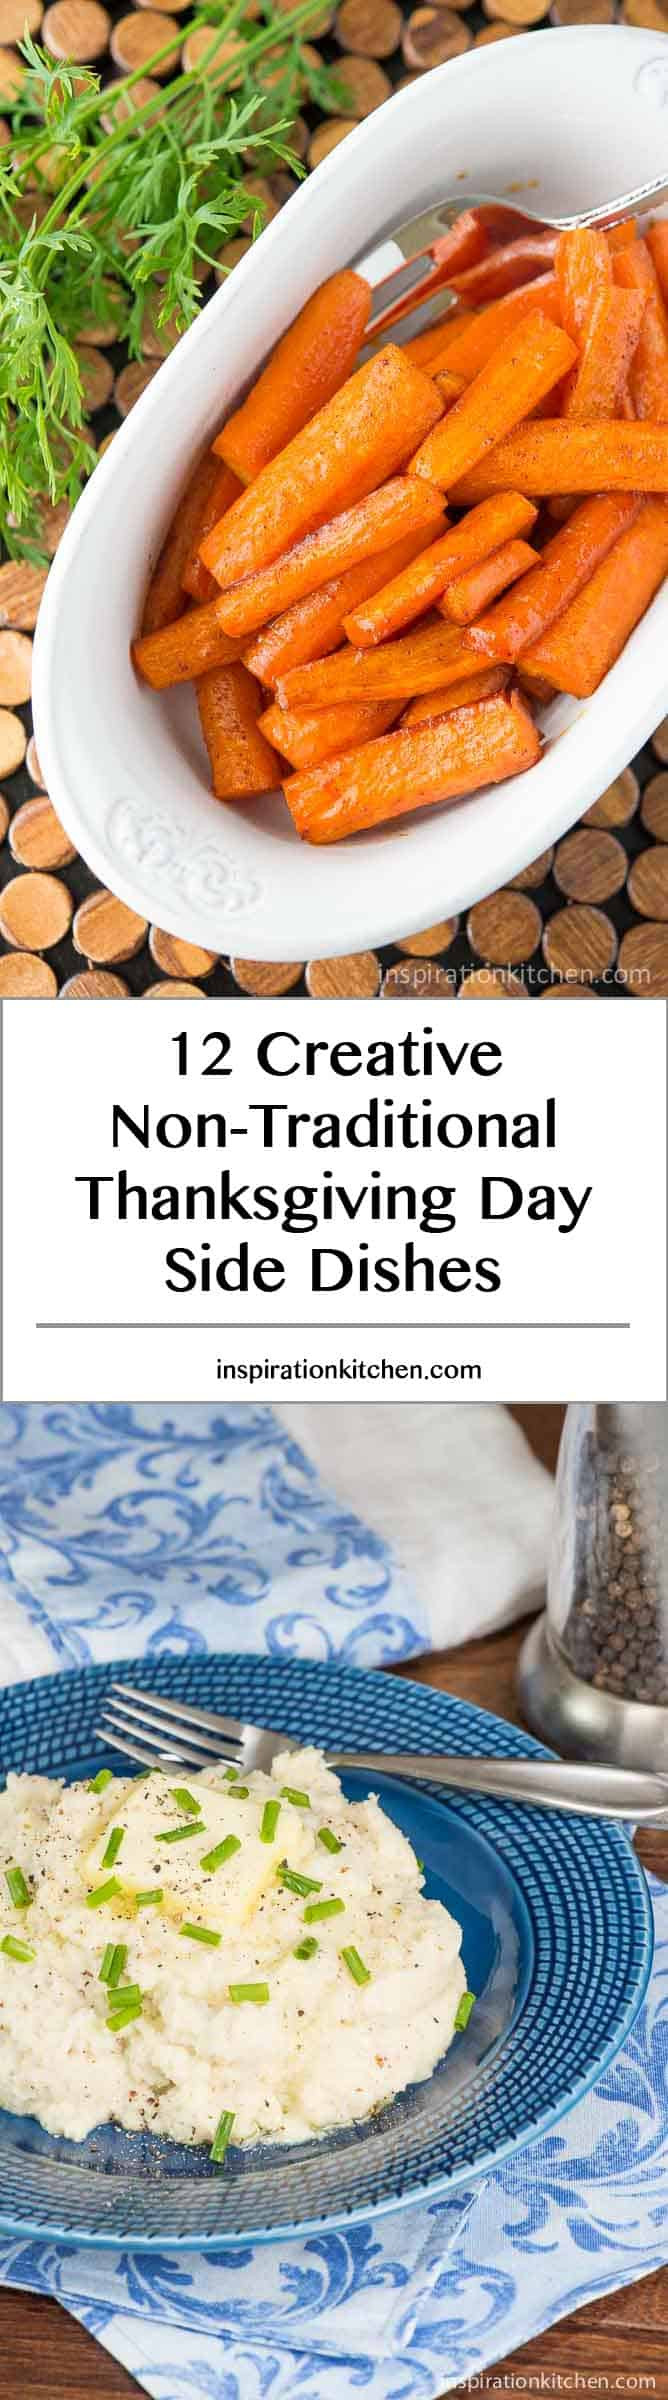 Non Traditional Thanksgiving Side Dishes
 12 Creative Non Traditional Thanksgiving Day Side Dishes